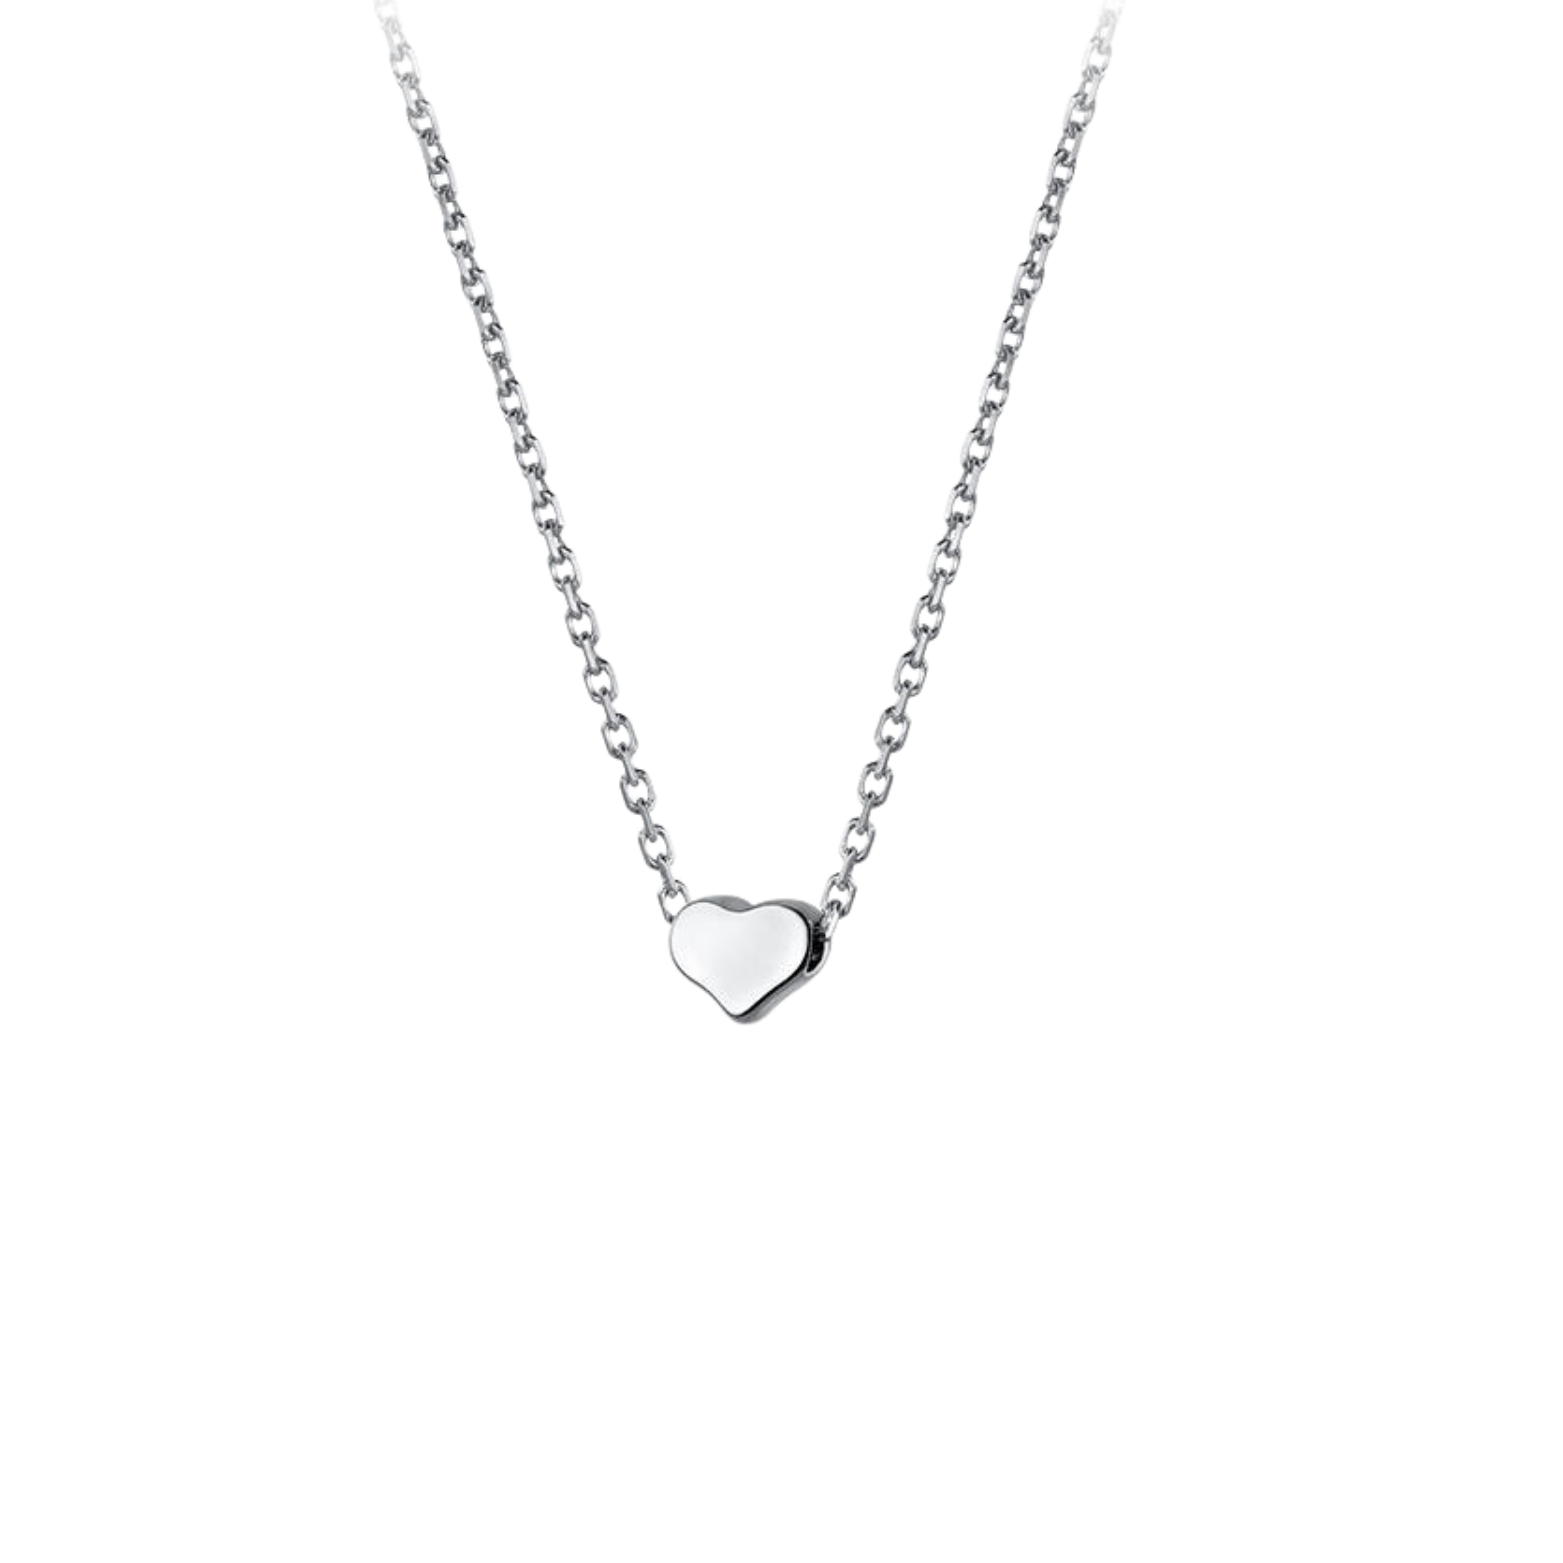 Sterling silver heart-shaped Amore necklace displayed on a pristine white background